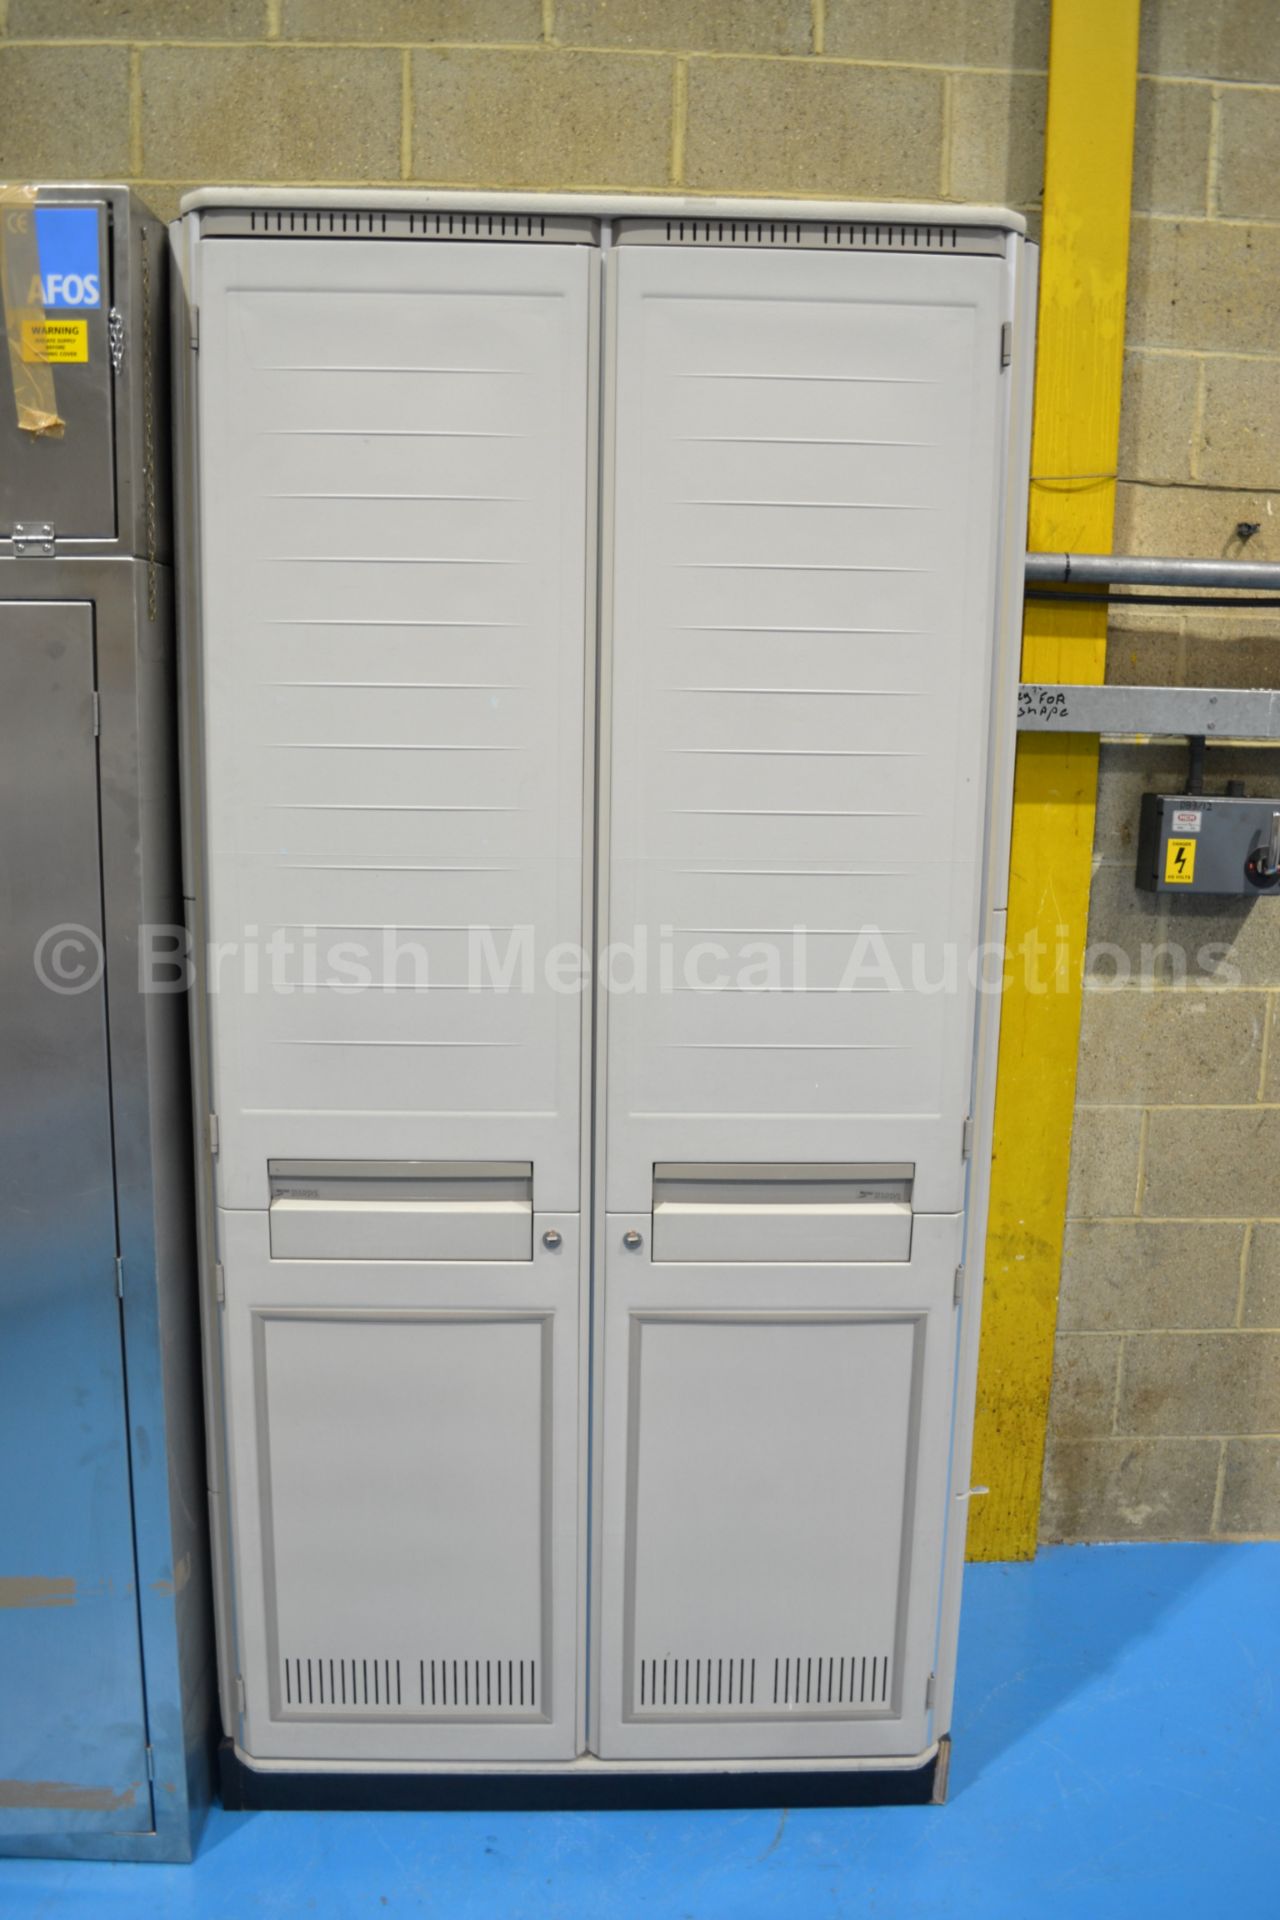 AFOS Endoscope Cabinet and Metro Starsys Endoscope - Image 3 of 3